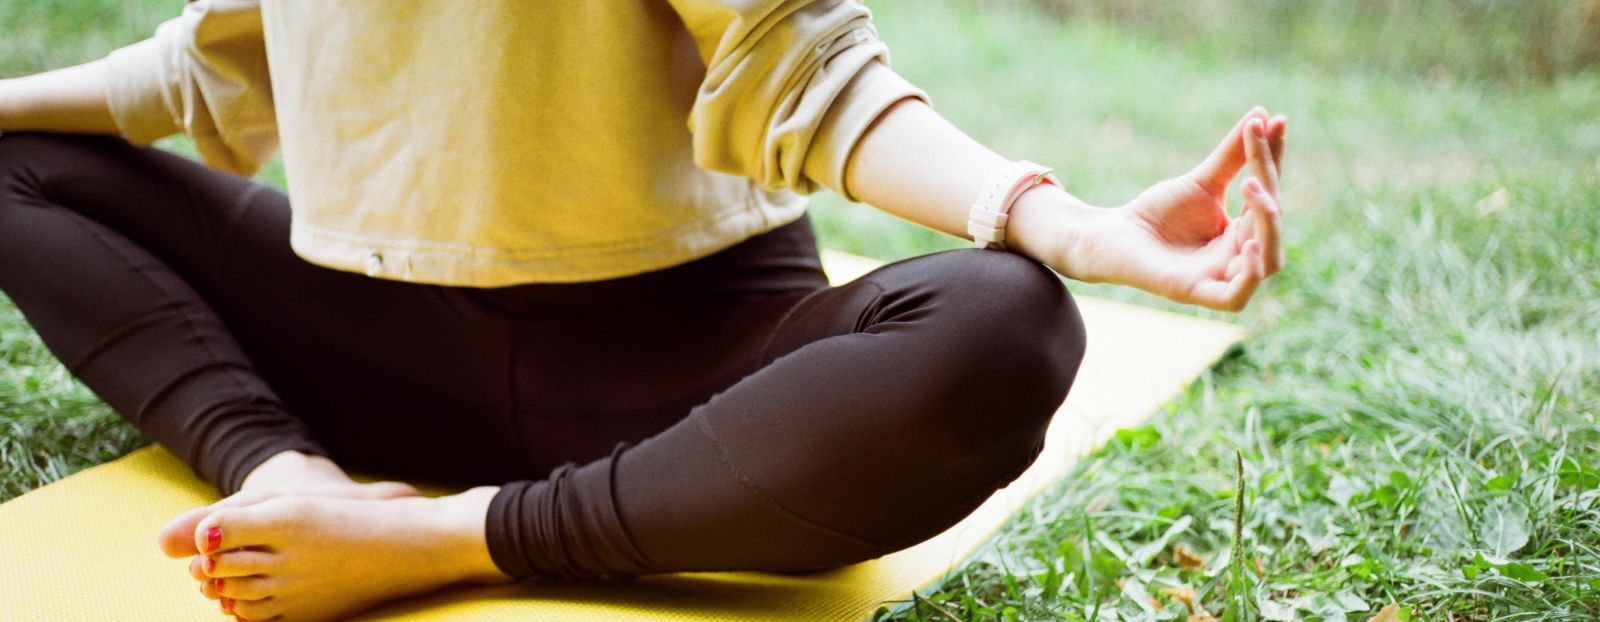 a person doing yoga on a grassy field during daytime